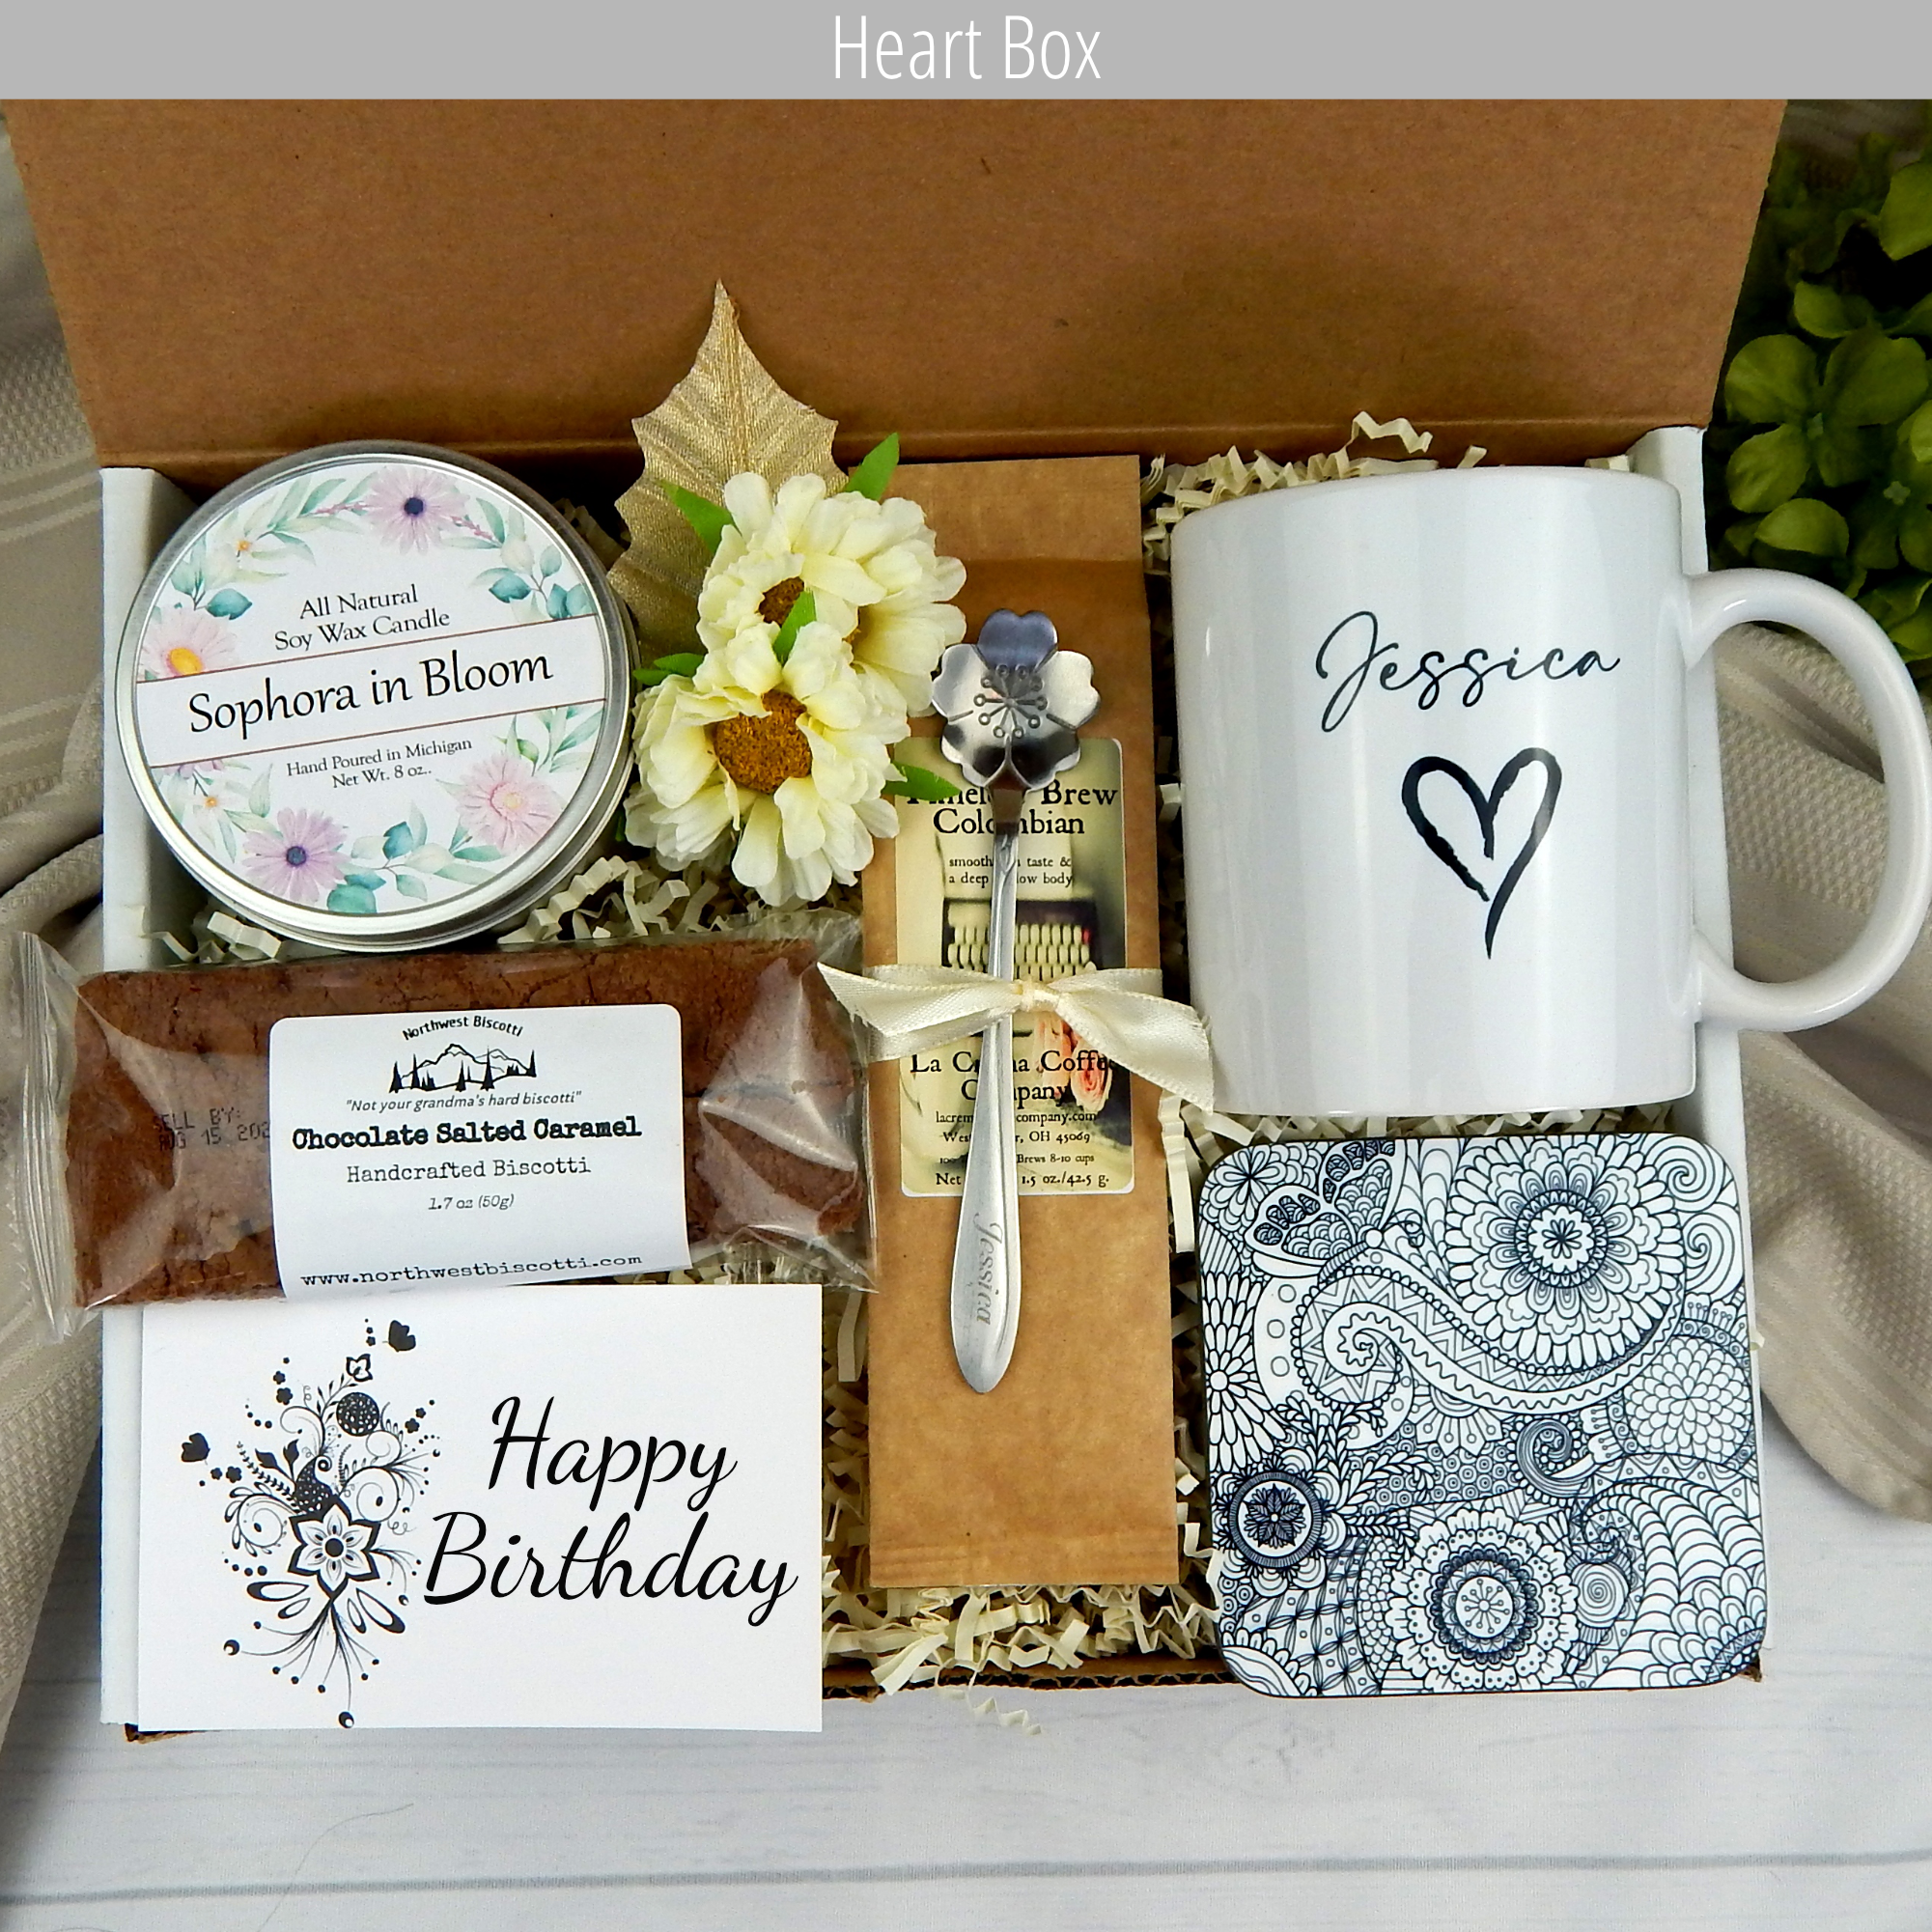 6 Best Birthday Gifts Delivery In Singapore - Gifts That Engage Hearts |  Alskar